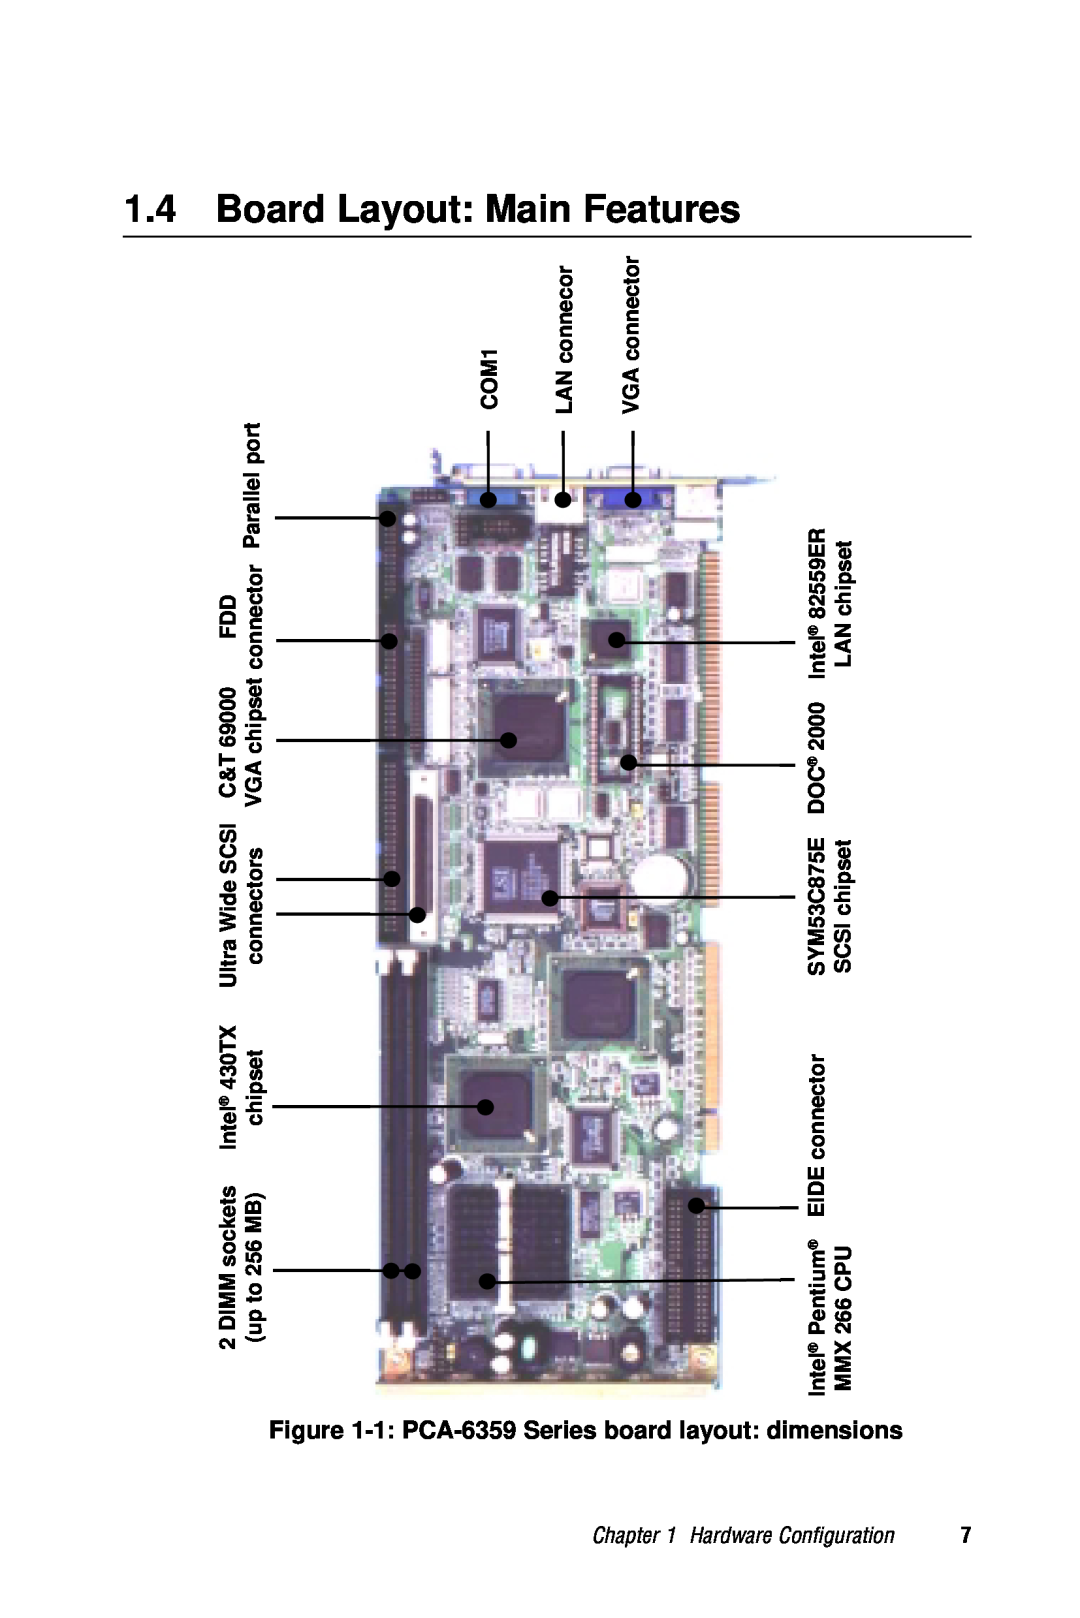 Advantech user manual Board Layout Main Features, 1 PCA-6359 Series board layout dimensions 